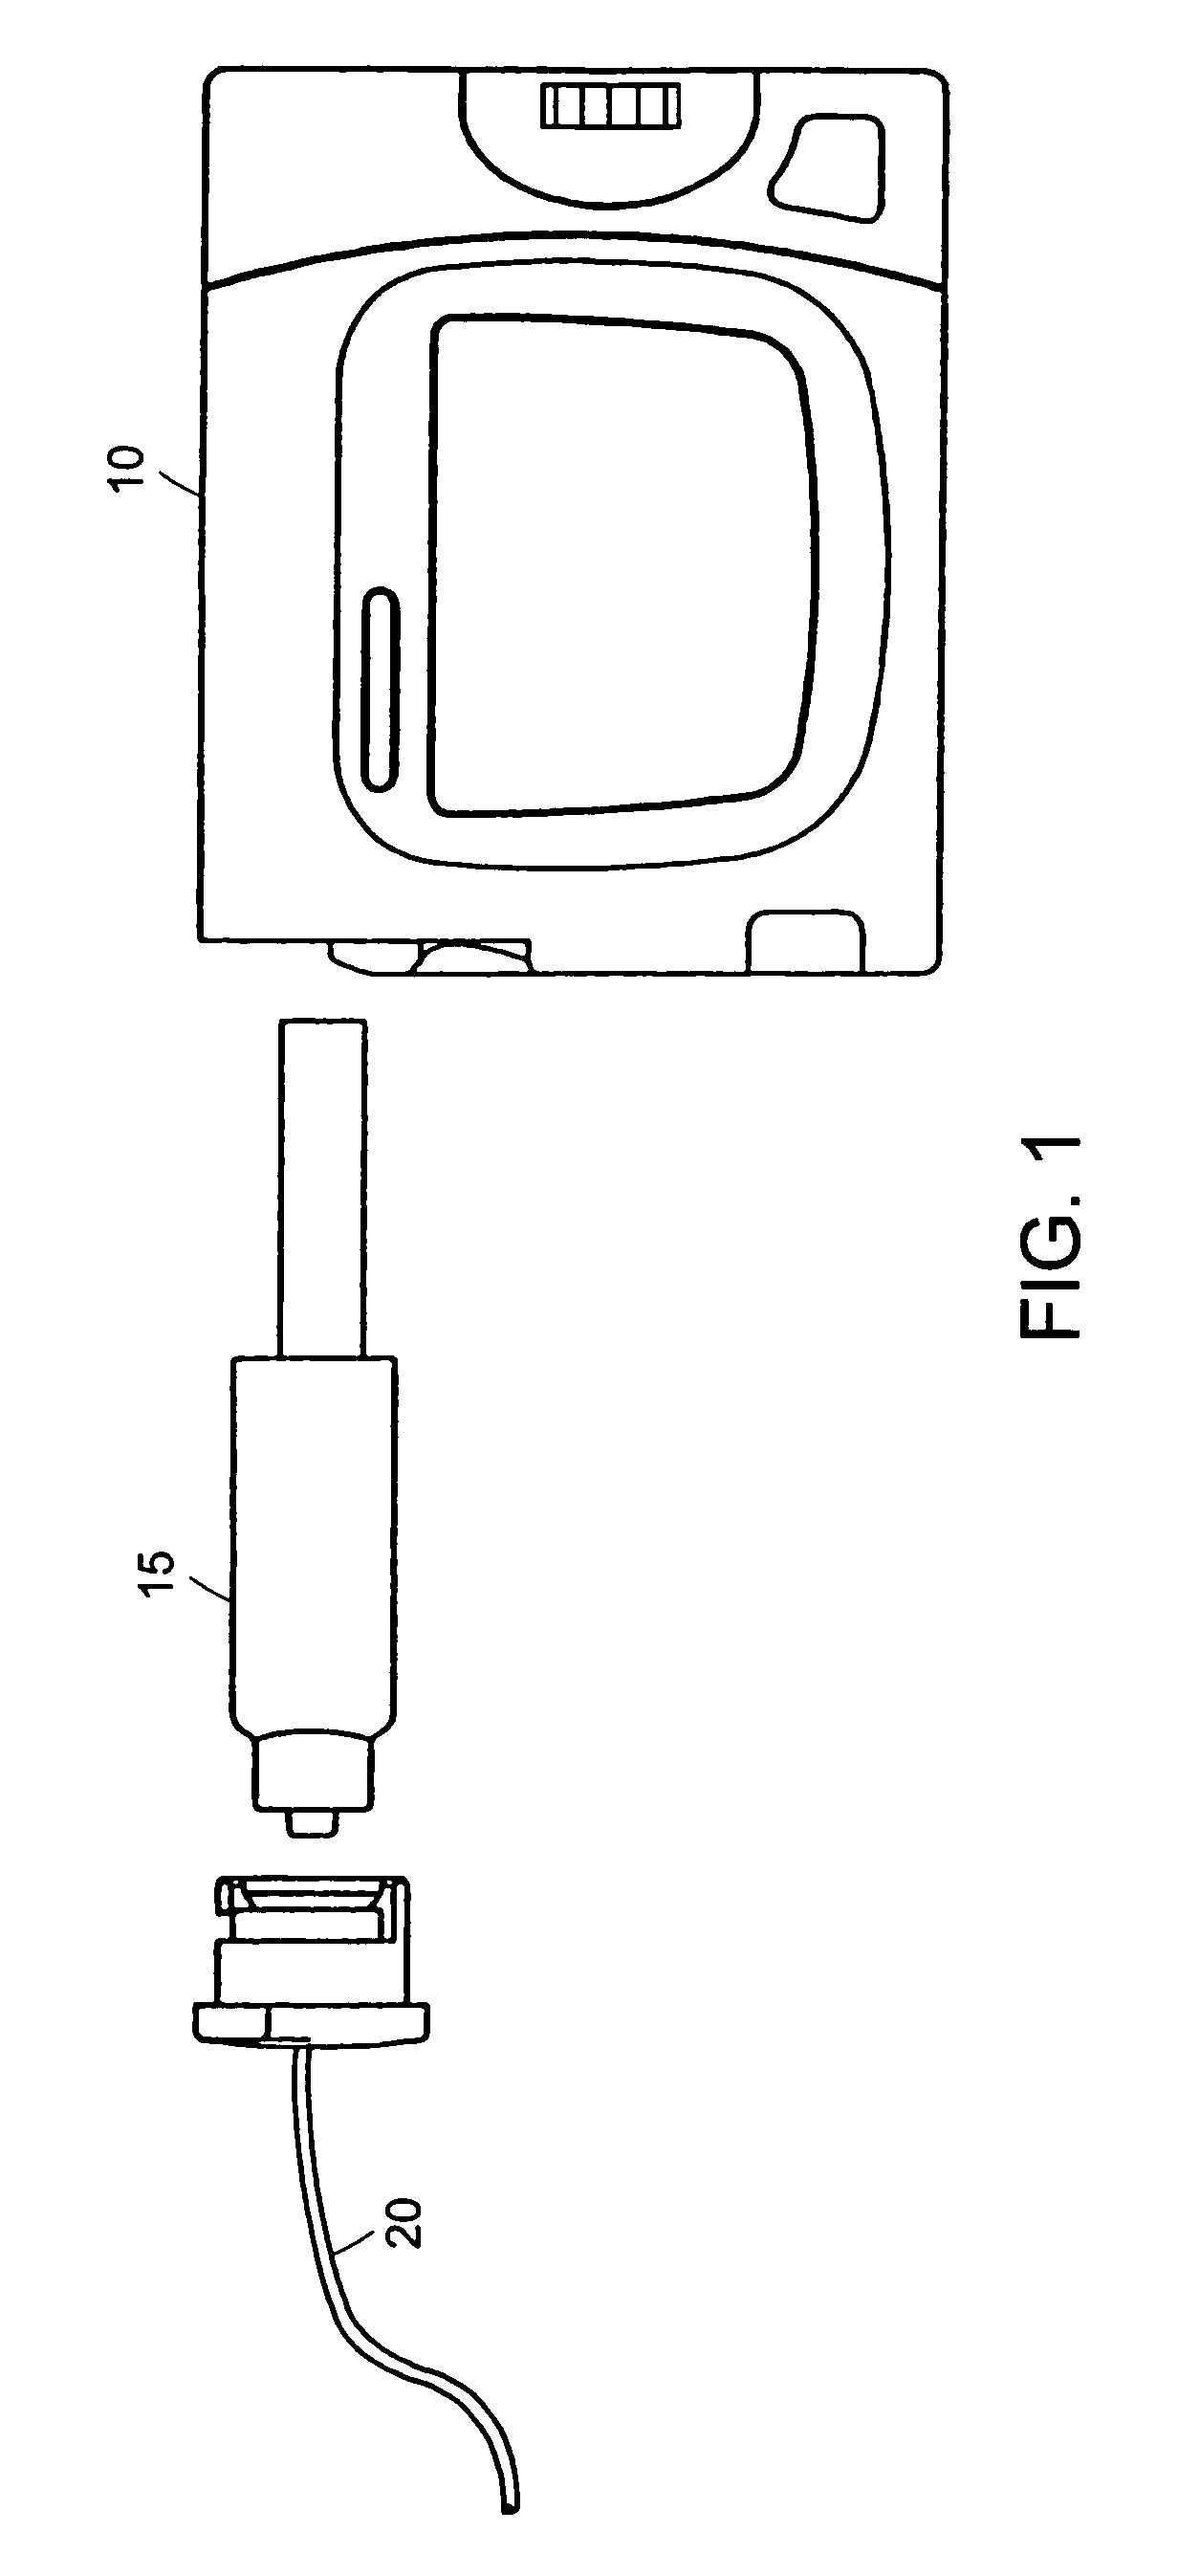 Loading mechanism for infusion pump